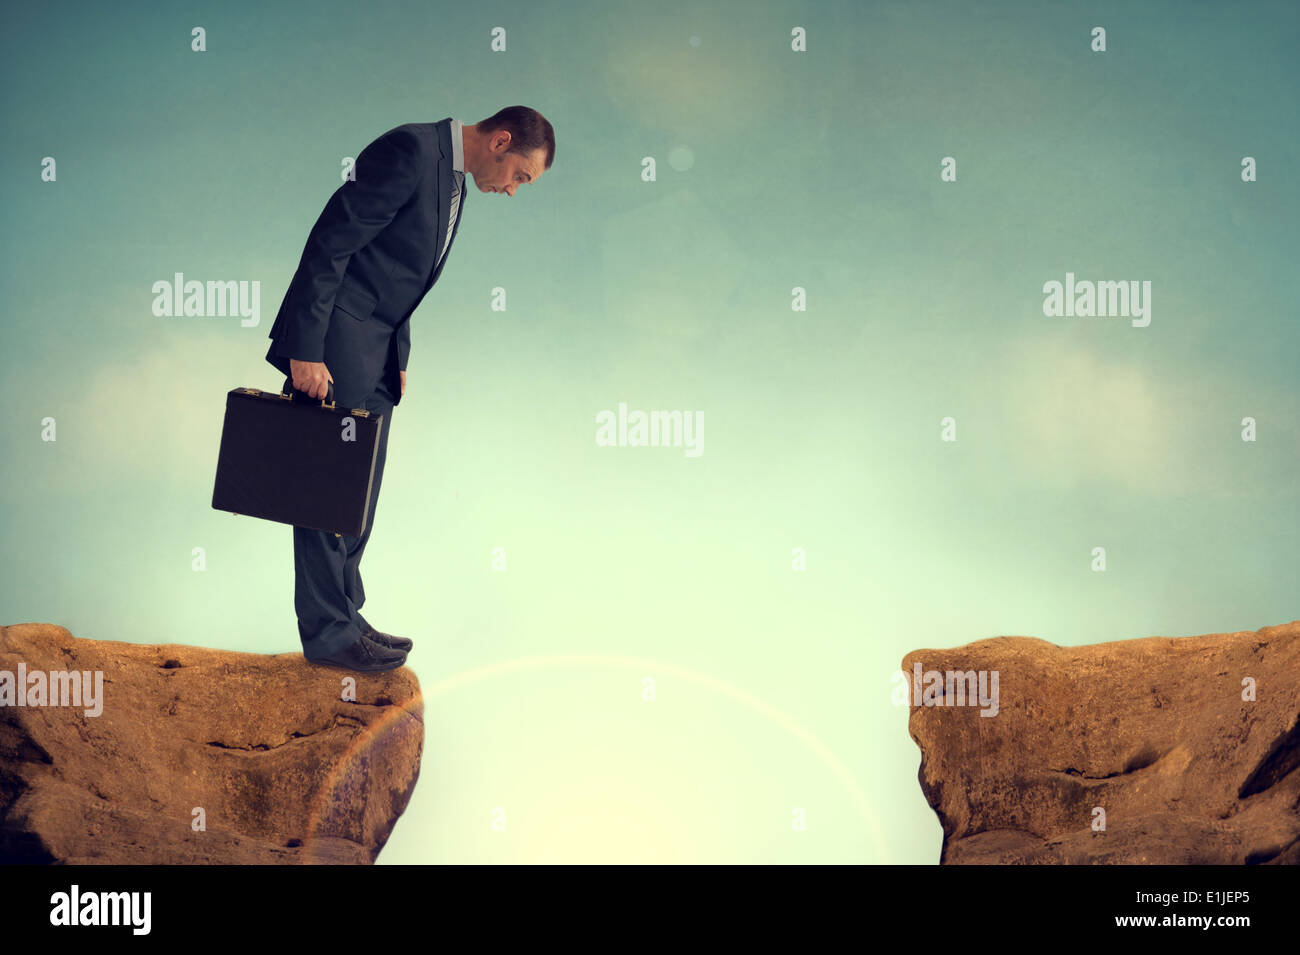 businessman on the edge of a cliff or brink of a crevasse looking down Stock Photo